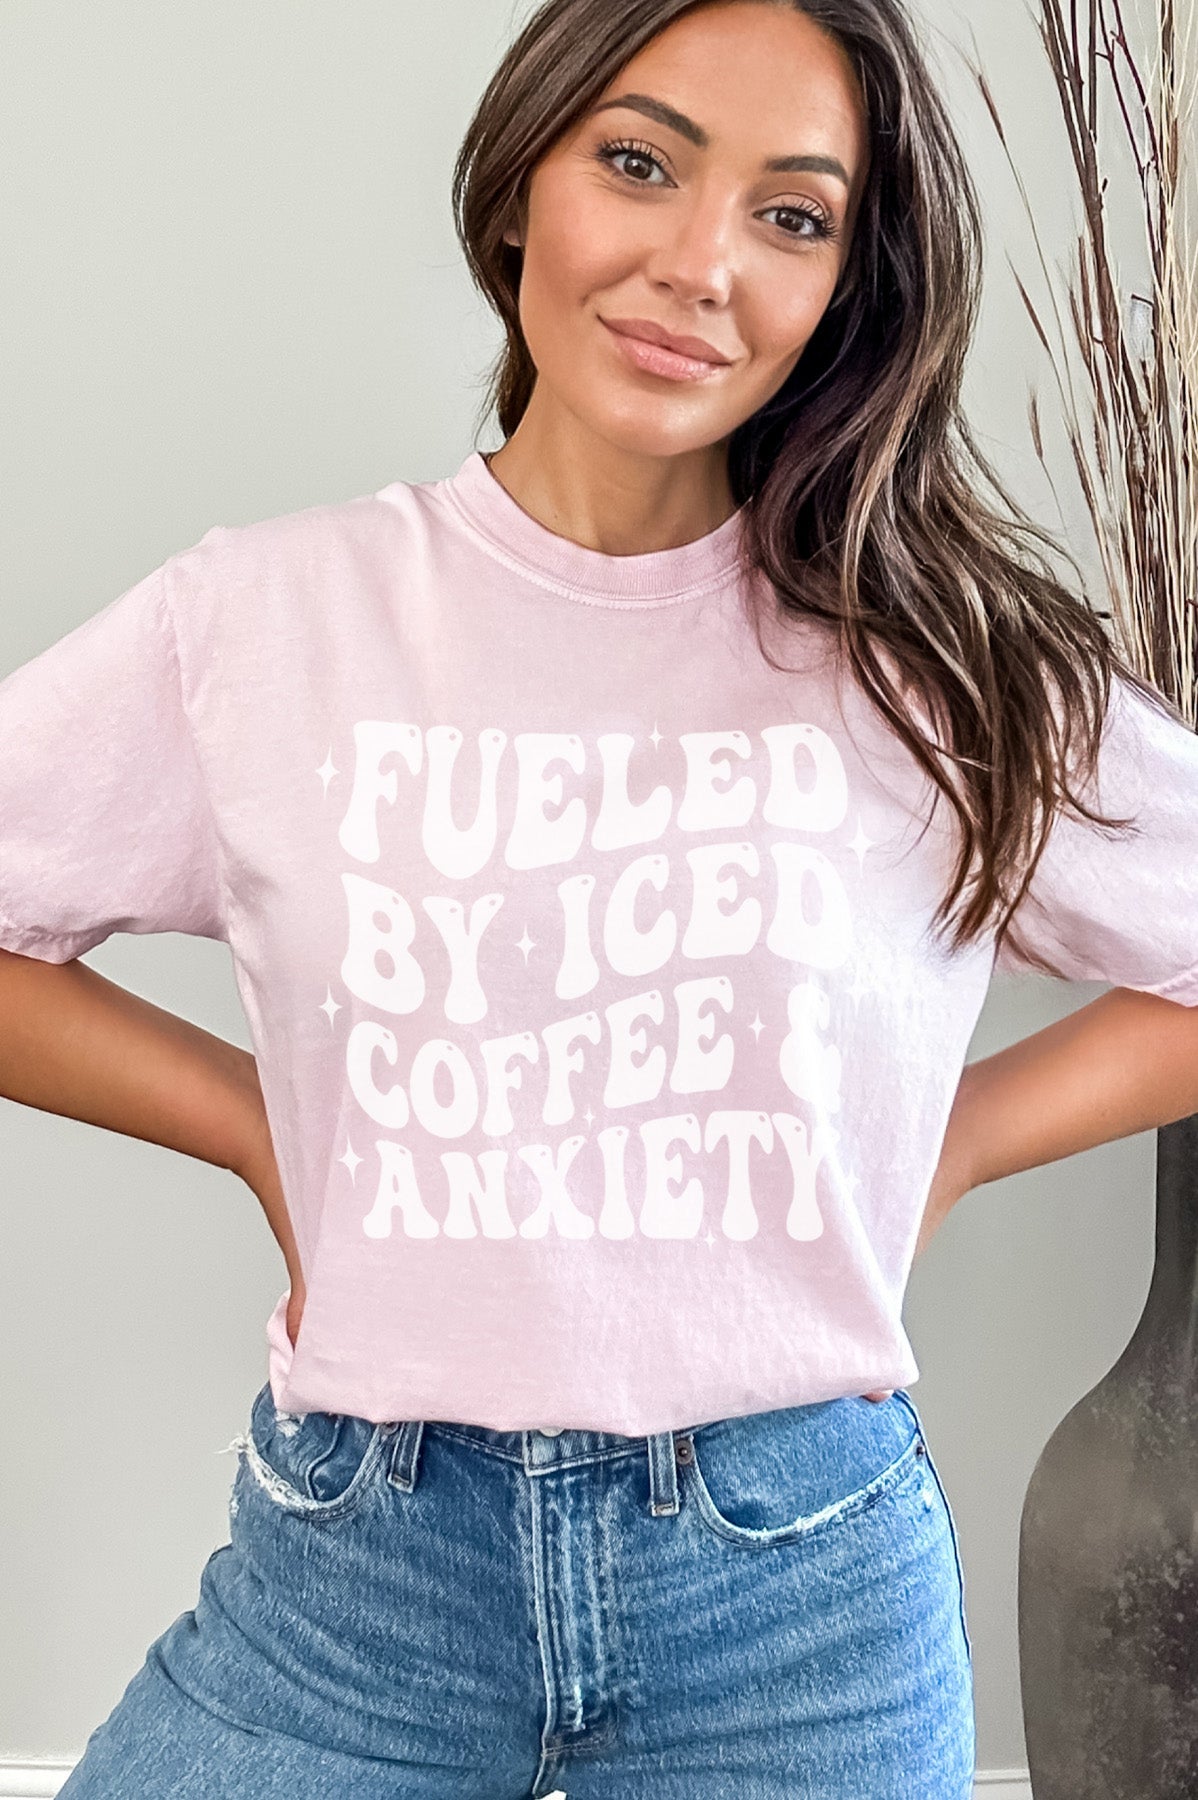 Fueled By Iced Coffee & Anxiety Garment-Dyed Graphic Tee